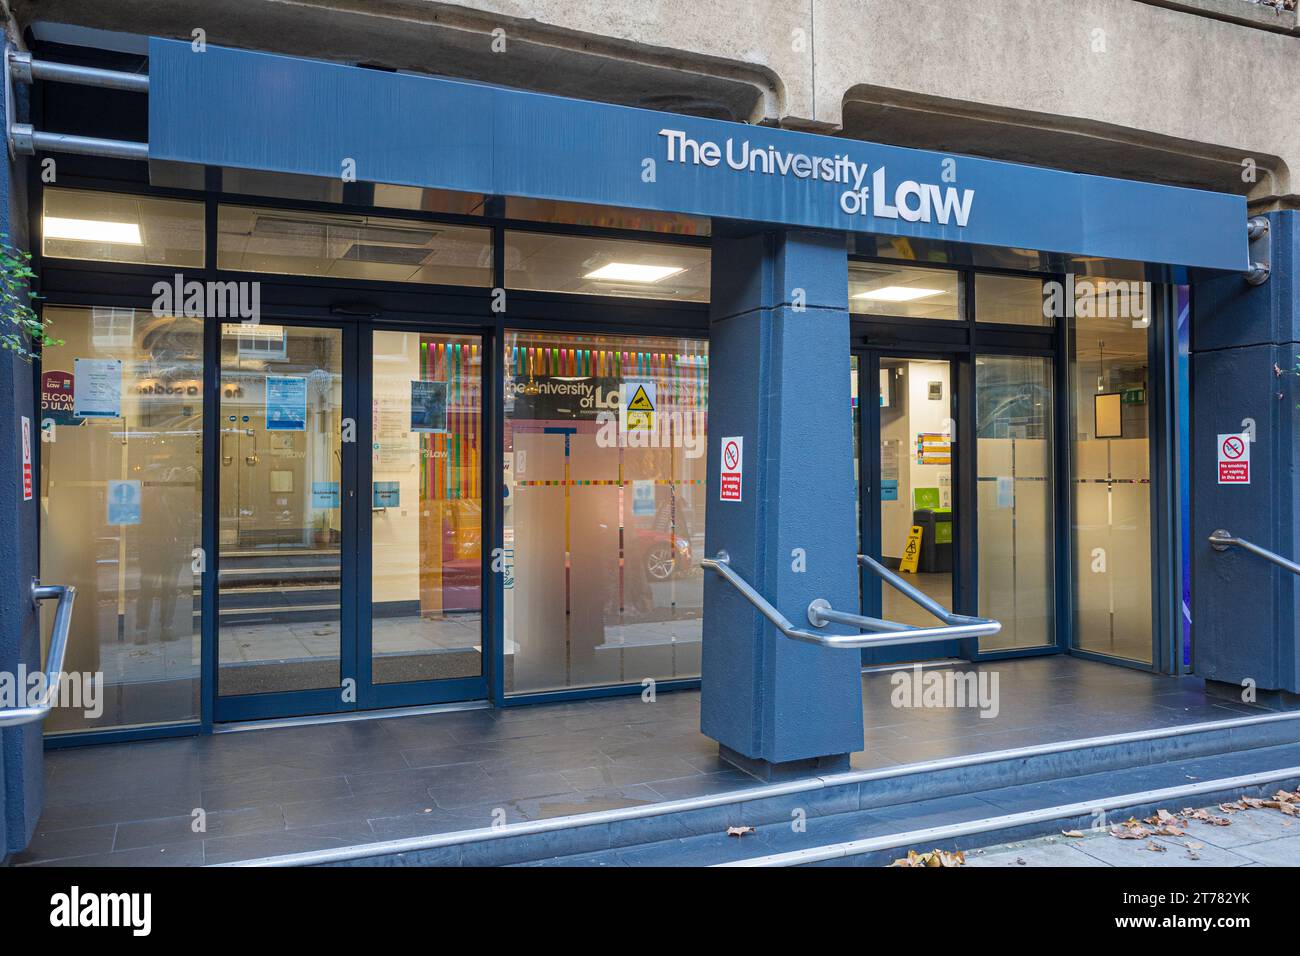 University of Law Bloomsbury London - ULAW specialised provider of legal education Founded in 1962 as the College of Law, the UK's largest law school. Stock Photo